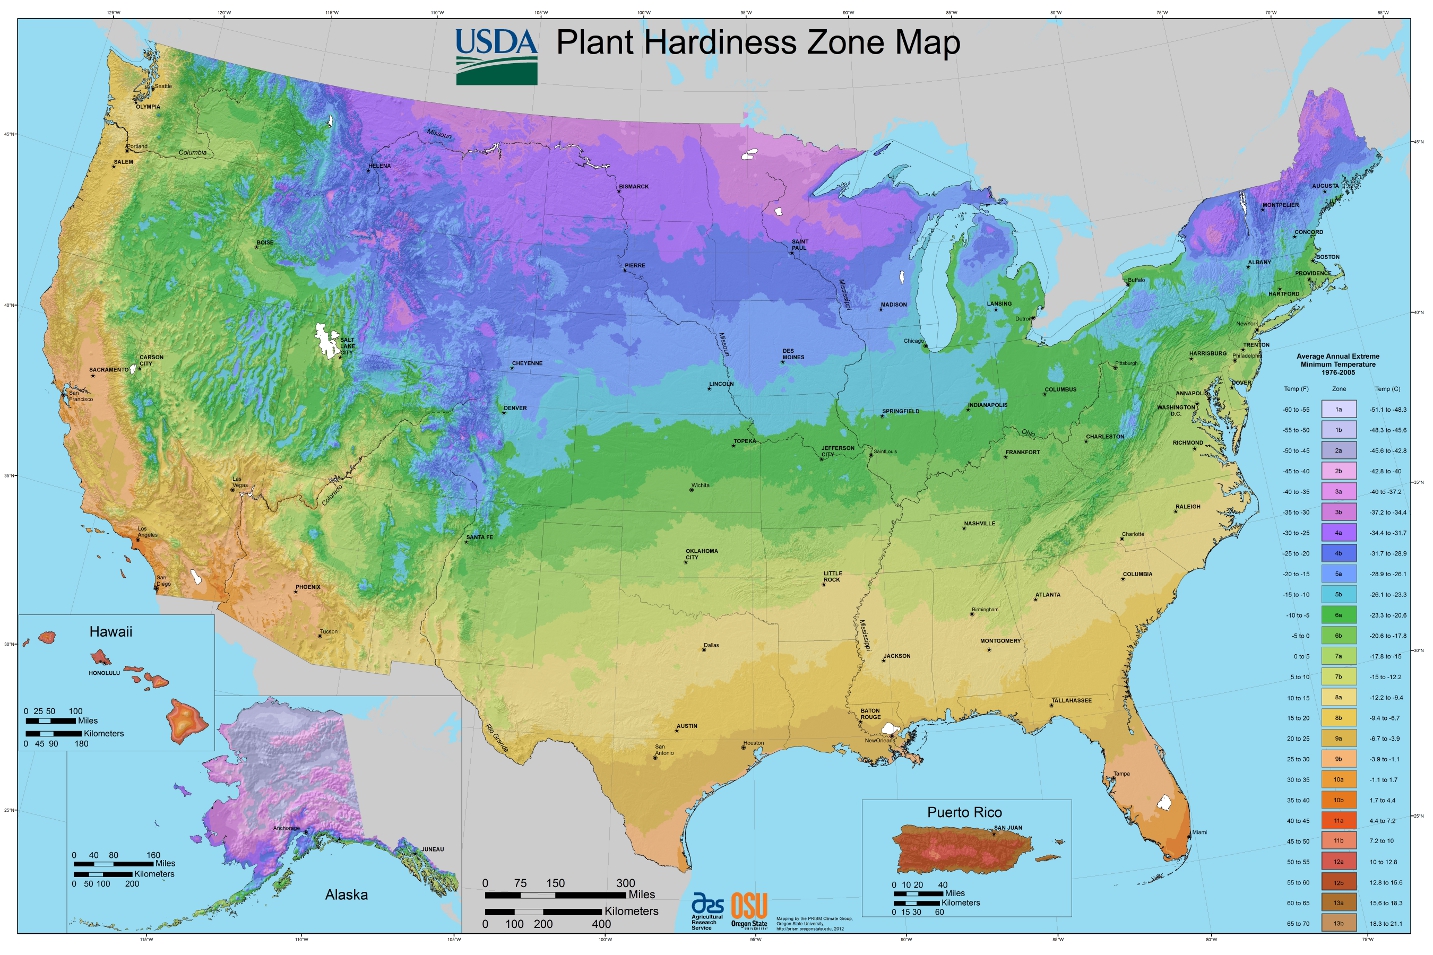 US Dept. of Agriculture New Hardiness Zones Show Impact of Global Warming